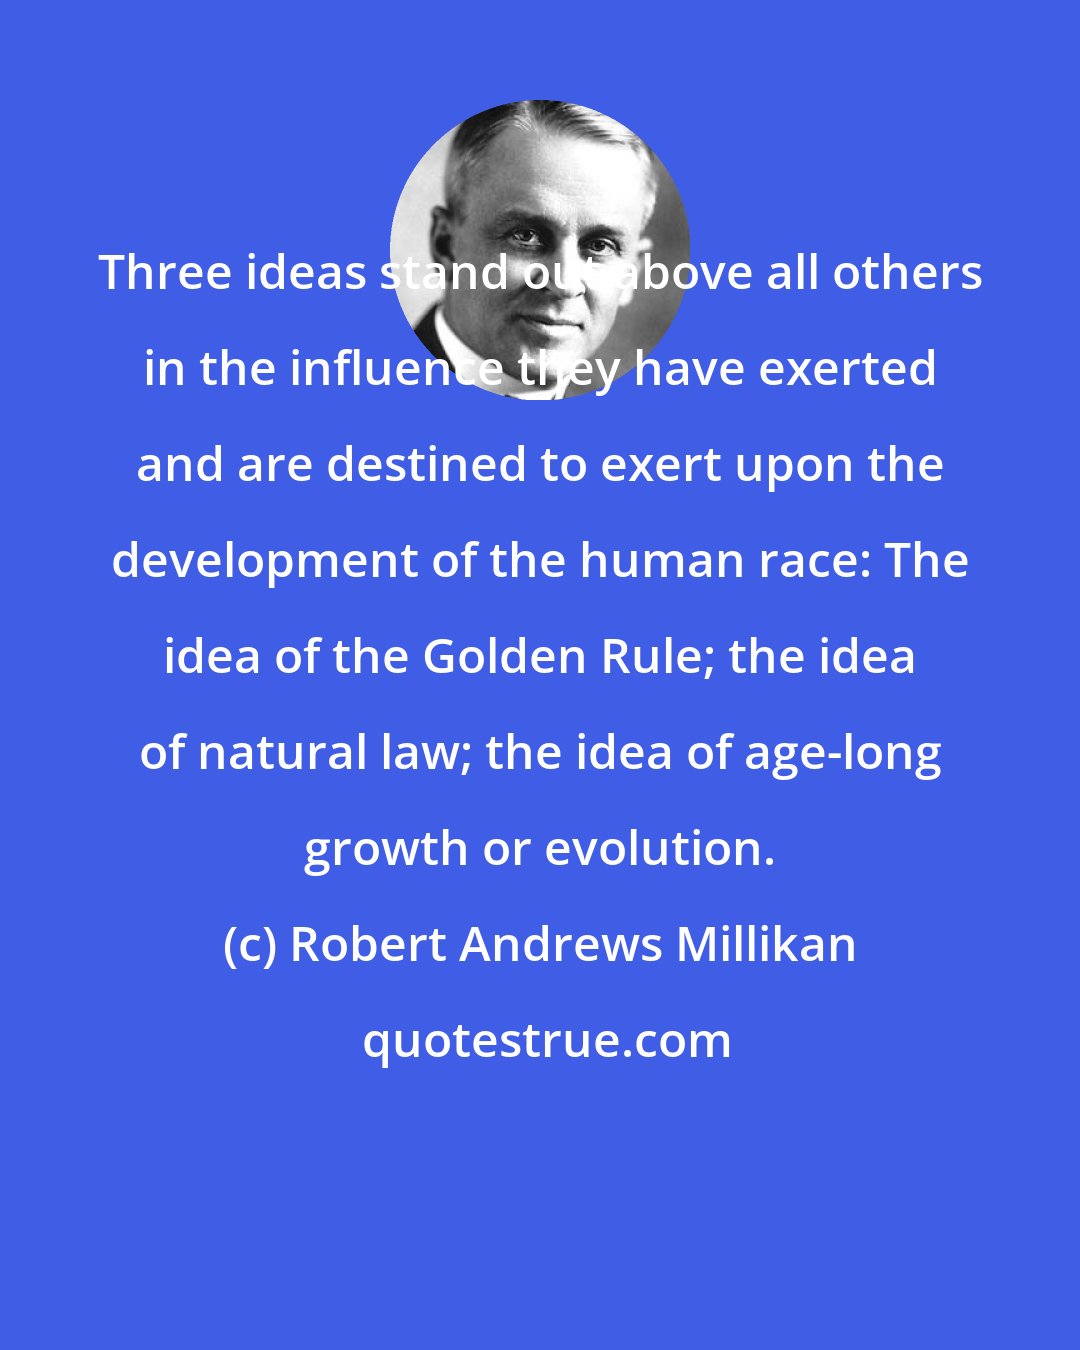 Robert Andrews Millikan: Three ideas stand out above all others in the influence they have exerted and are destined to exert upon the development of the human race: The idea of the Golden Rule; the idea of natural law; the idea of age-long growth or evolution.